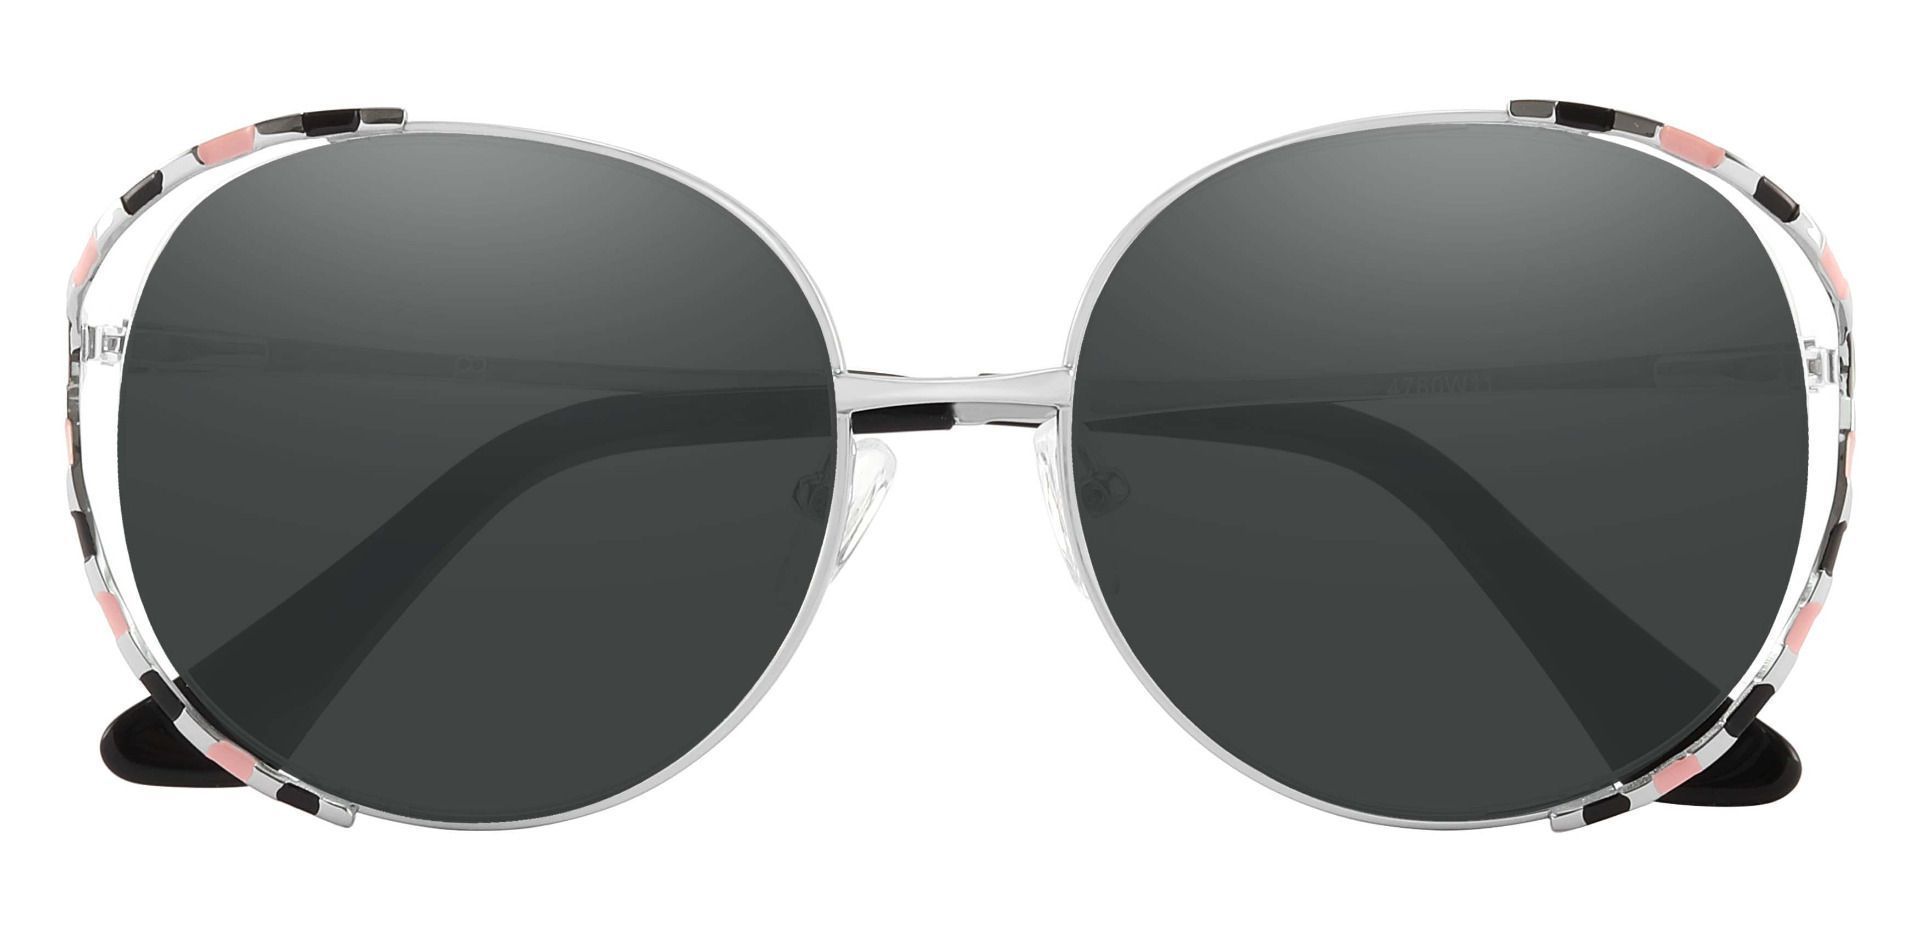 Dorothy Oval Non-Rx Sunglasses - Black Frame With Gray Lenses